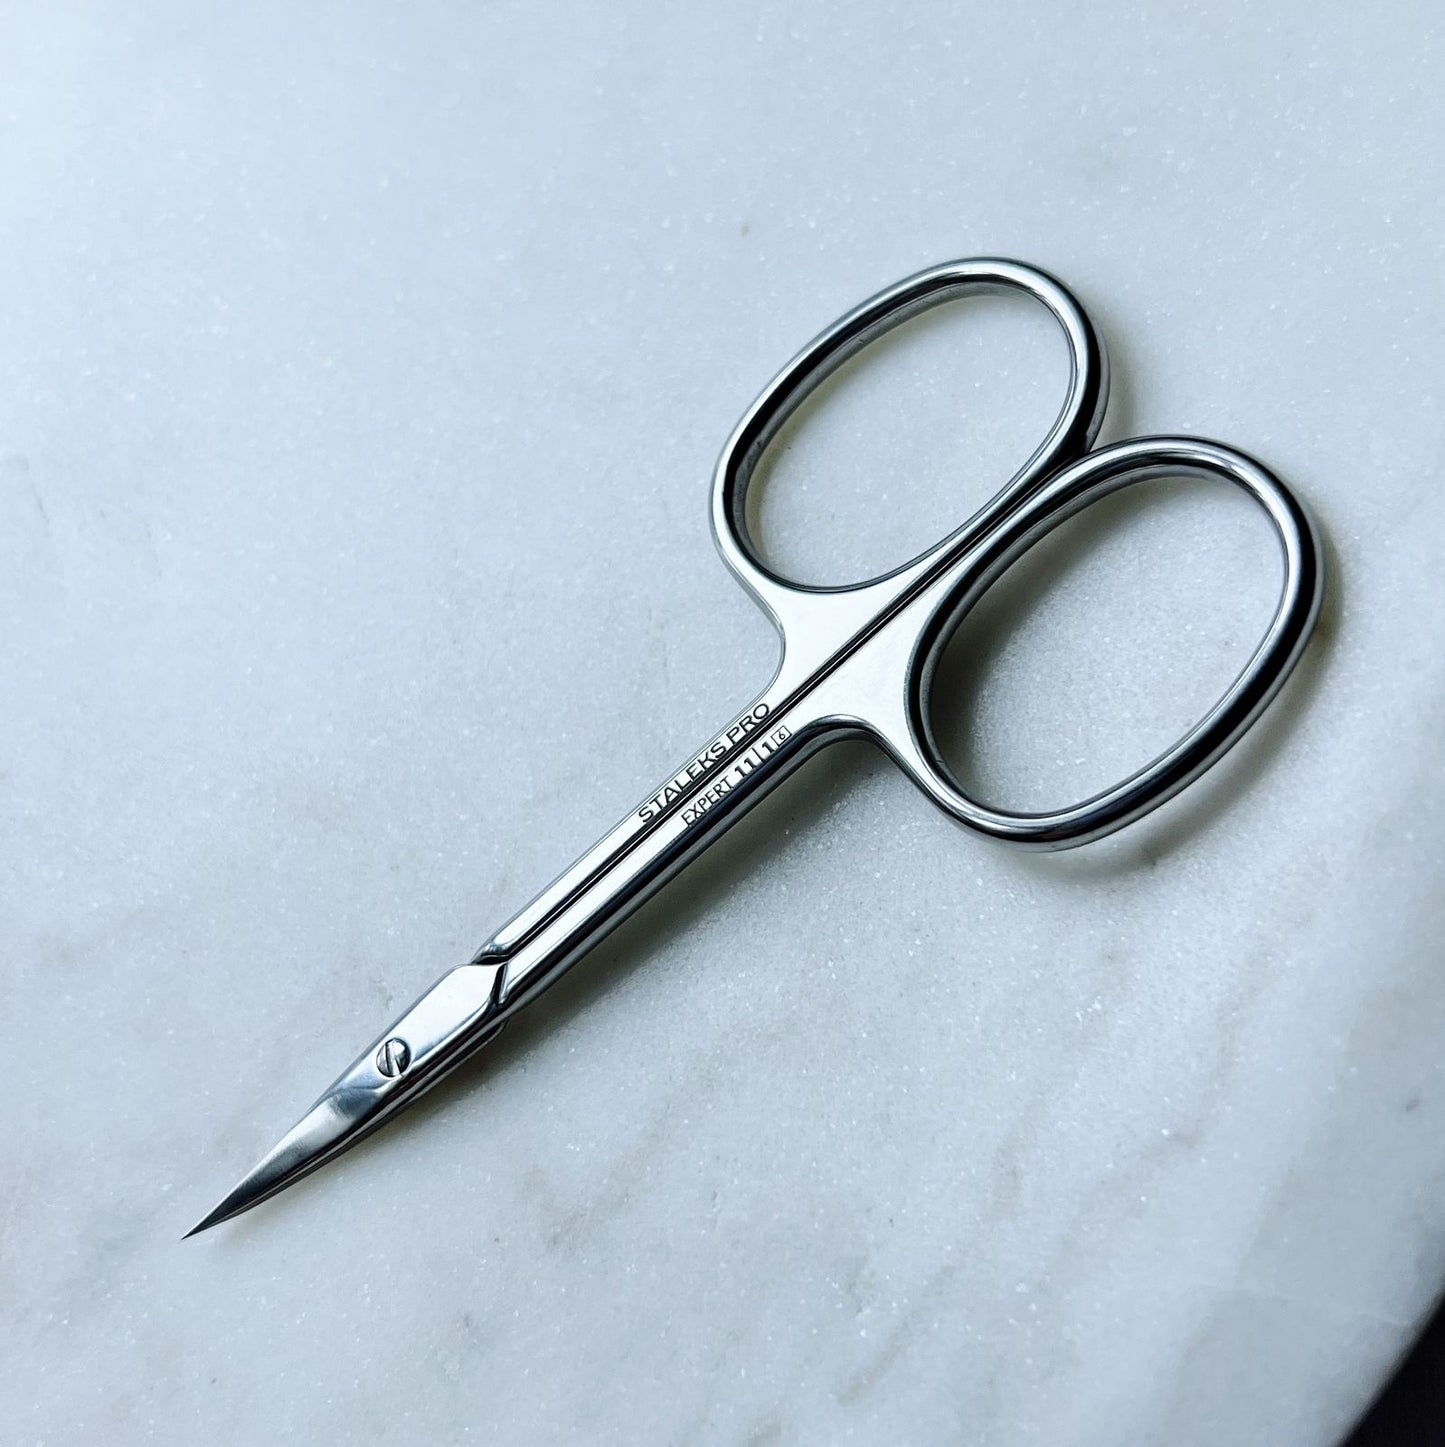 Professional cuticle scissors for left-handed users Staleks Pro Expert 11 Type 1, SE-11/1